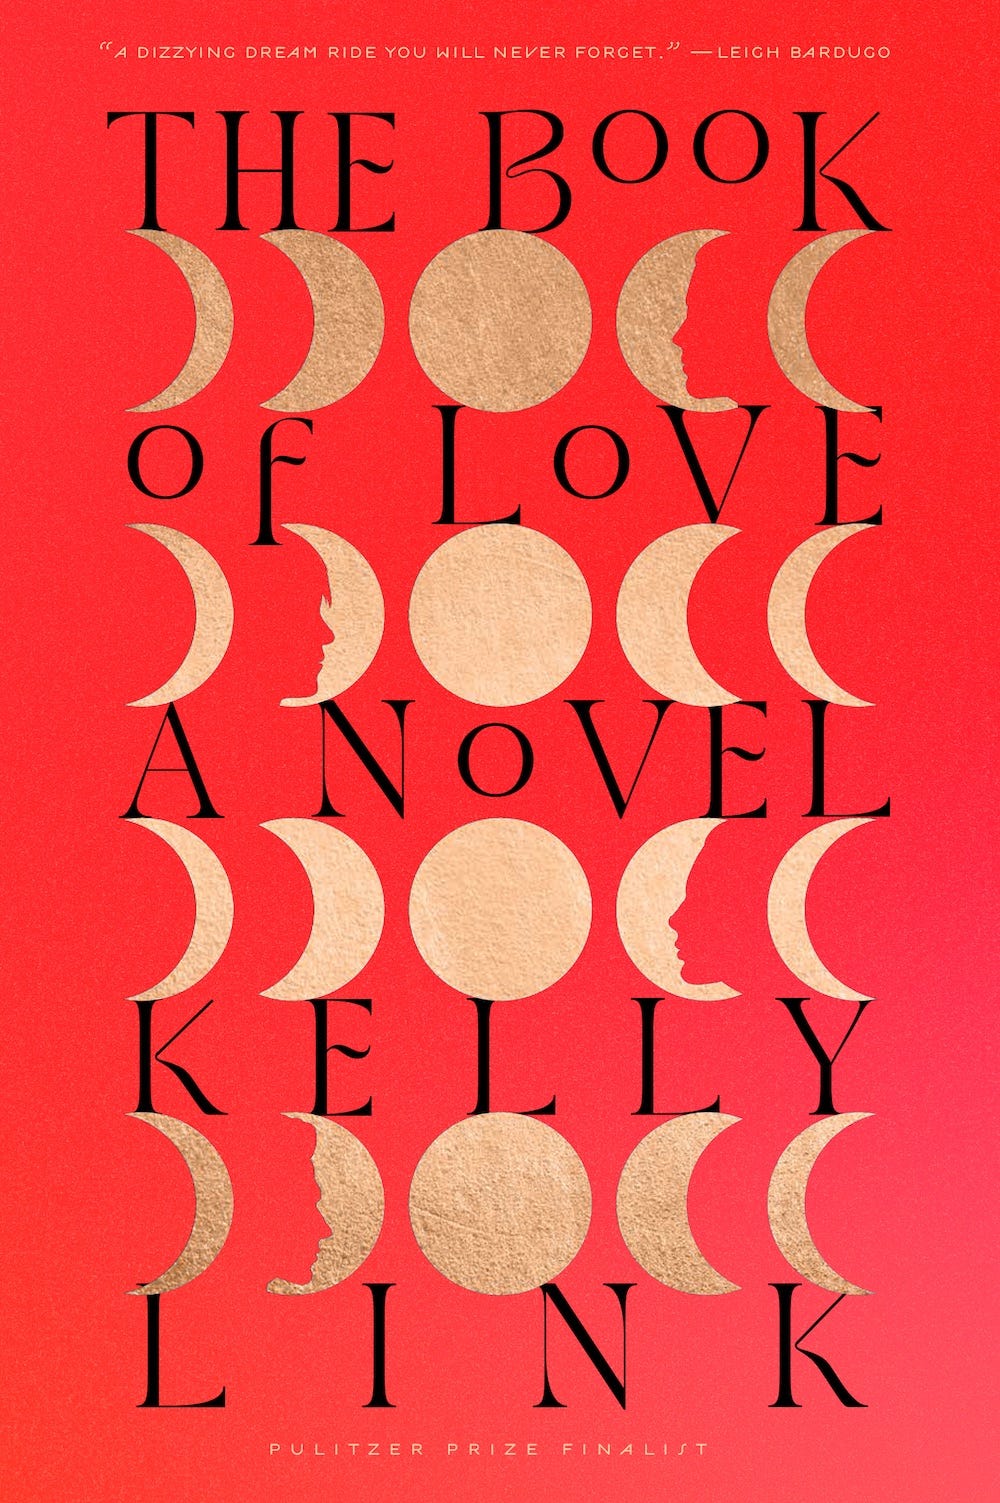 The Book of Love by Kelly Link | Goodreads